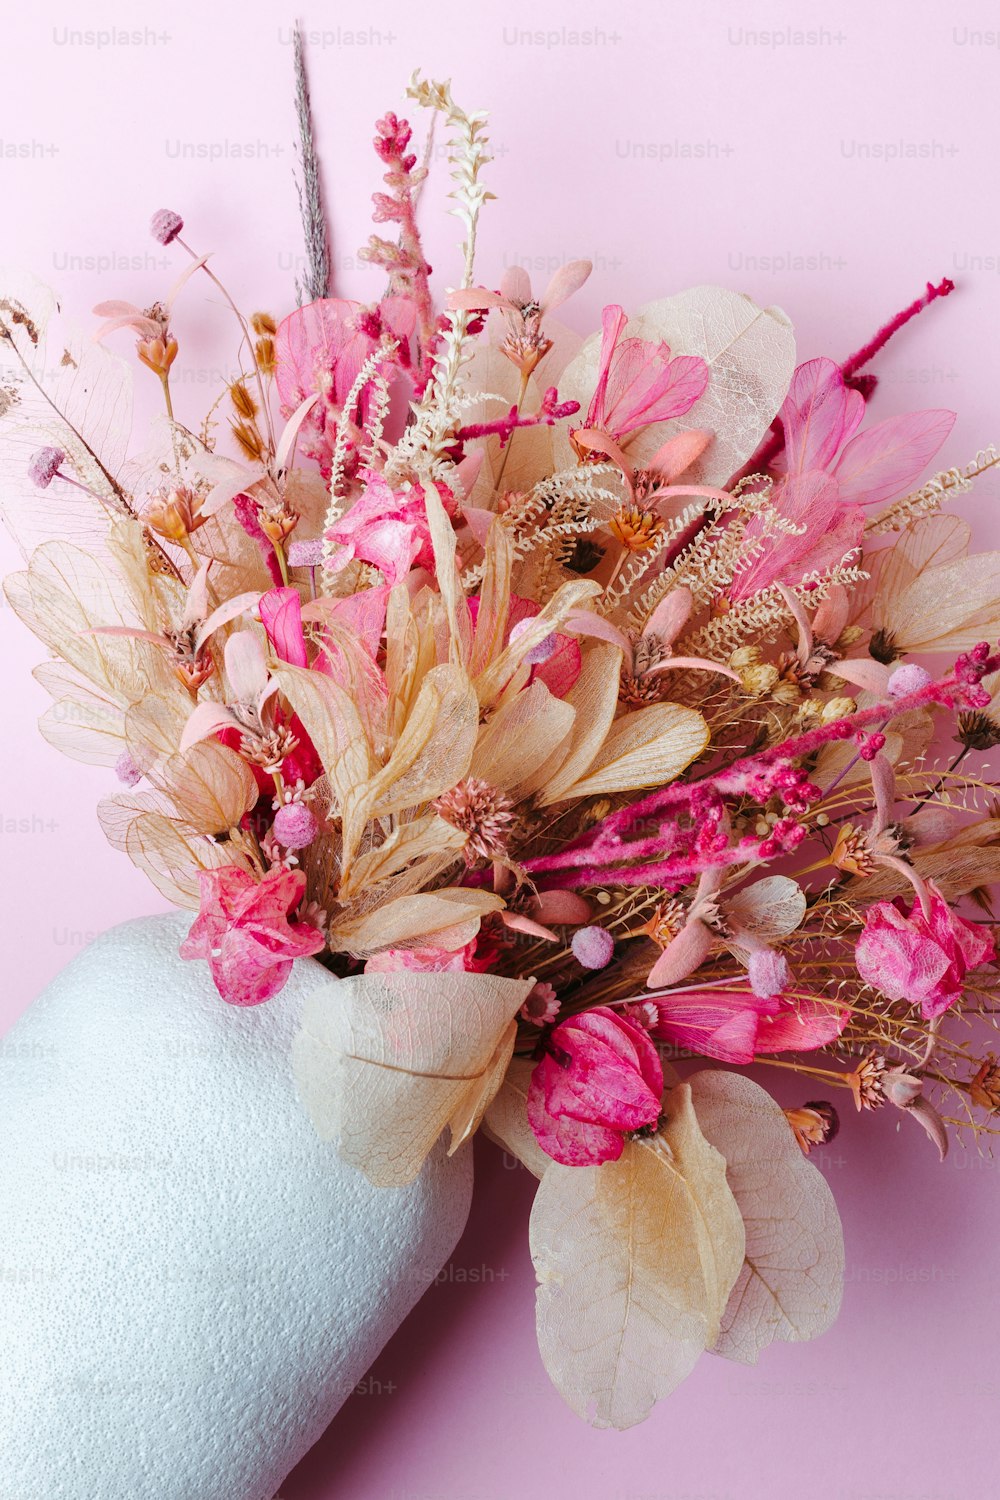 a hand holding a bouquet of flowers on a pink background